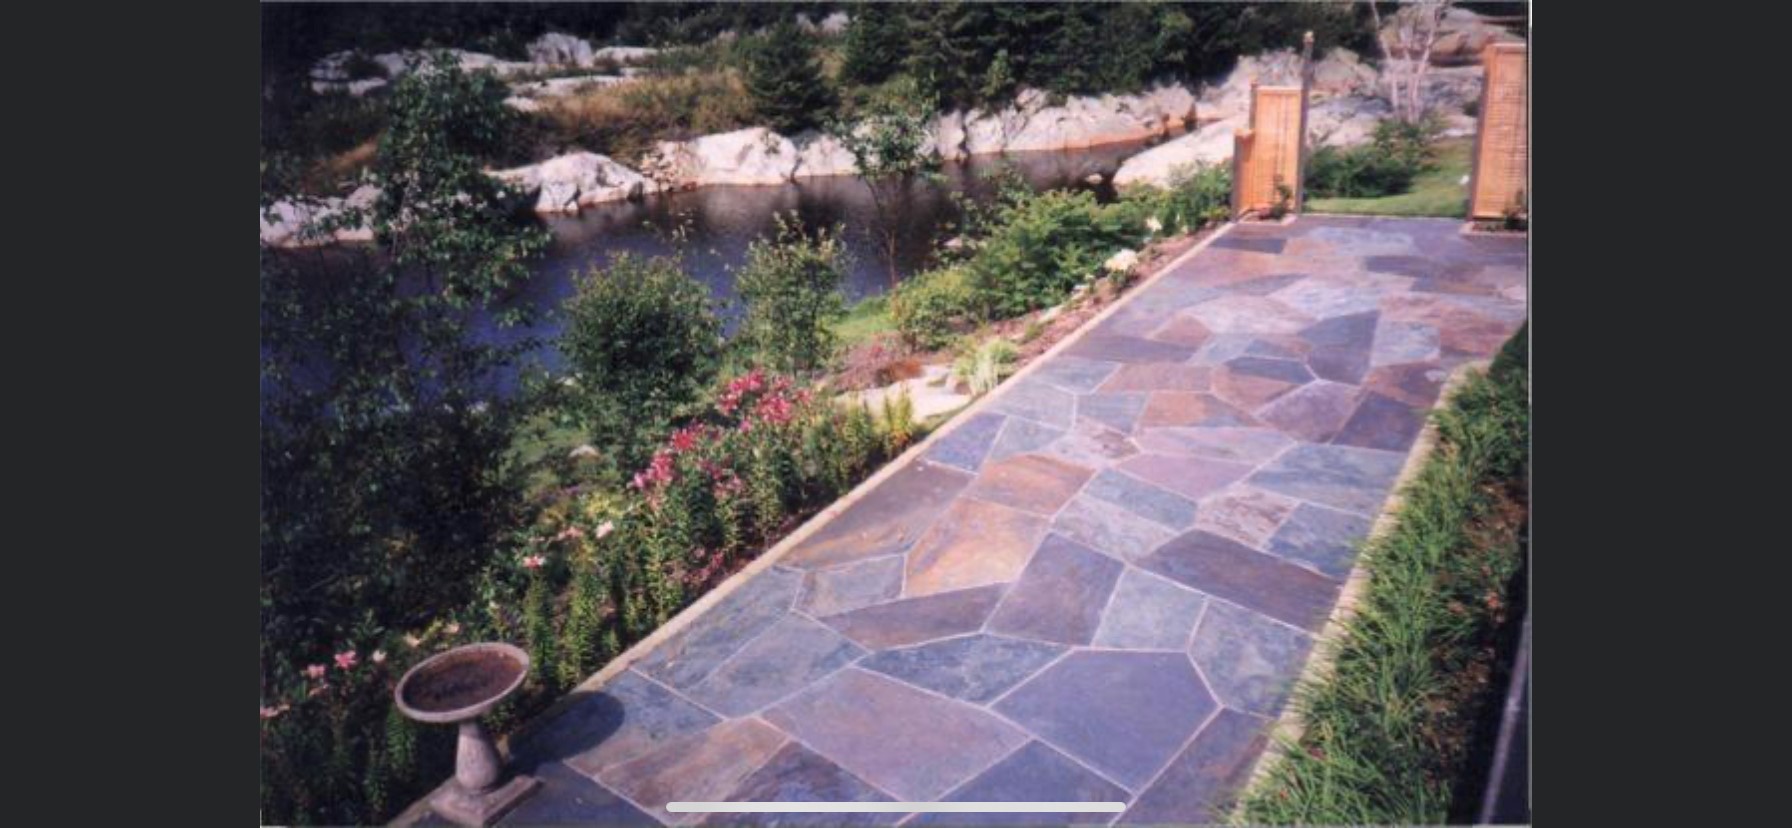 A scotia stone walkway with a river in the background.